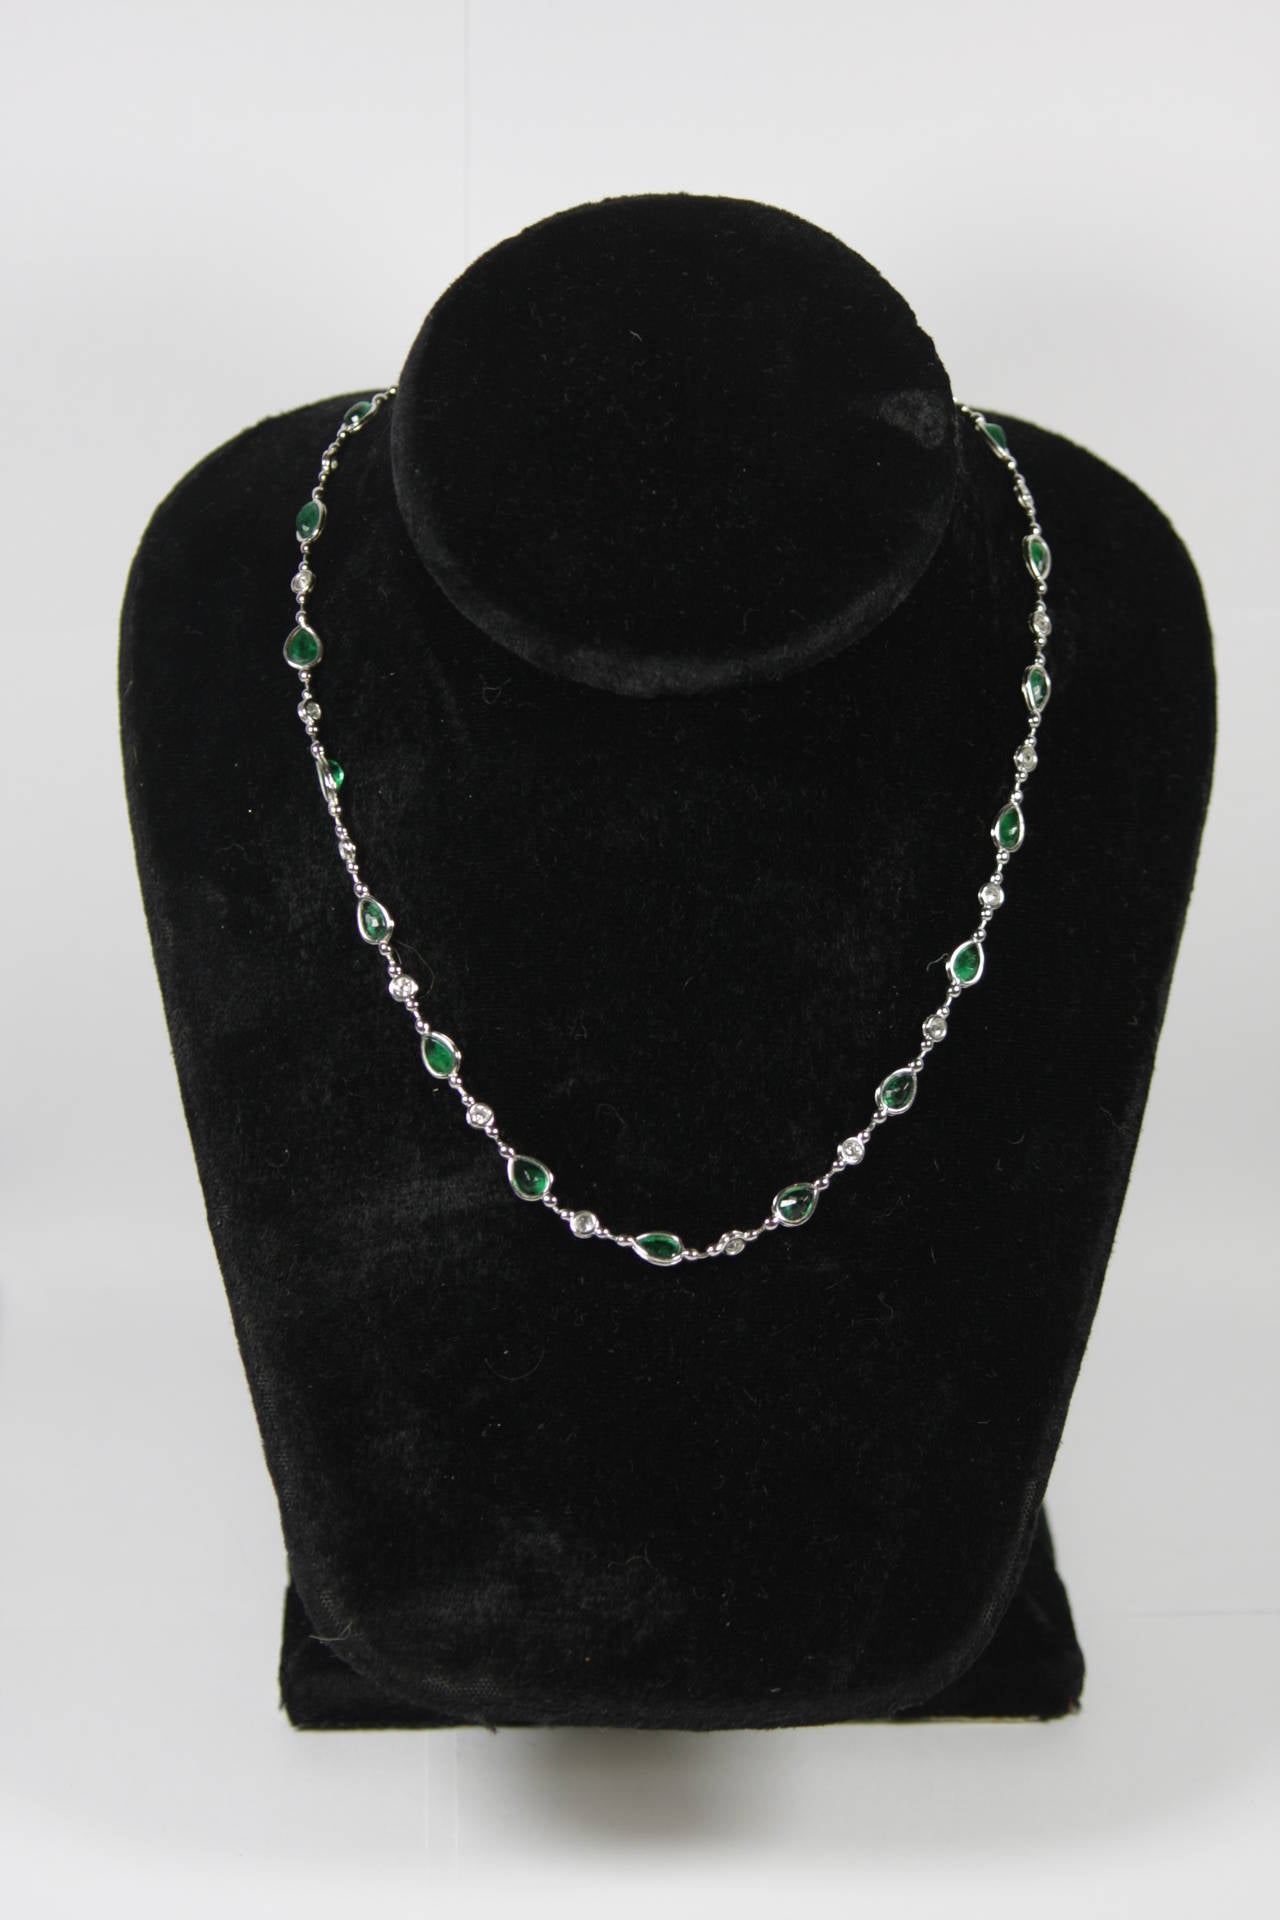 This stunning necklace is composed of platinum and features emeralds. The clasp features a stunning floating diamond.

Specs: 
Platinum  
Emeralds: 7.01 Carats Approximate Total Weight
Diamonds: 1.27 Carats Approximate Total Weight
Measures: